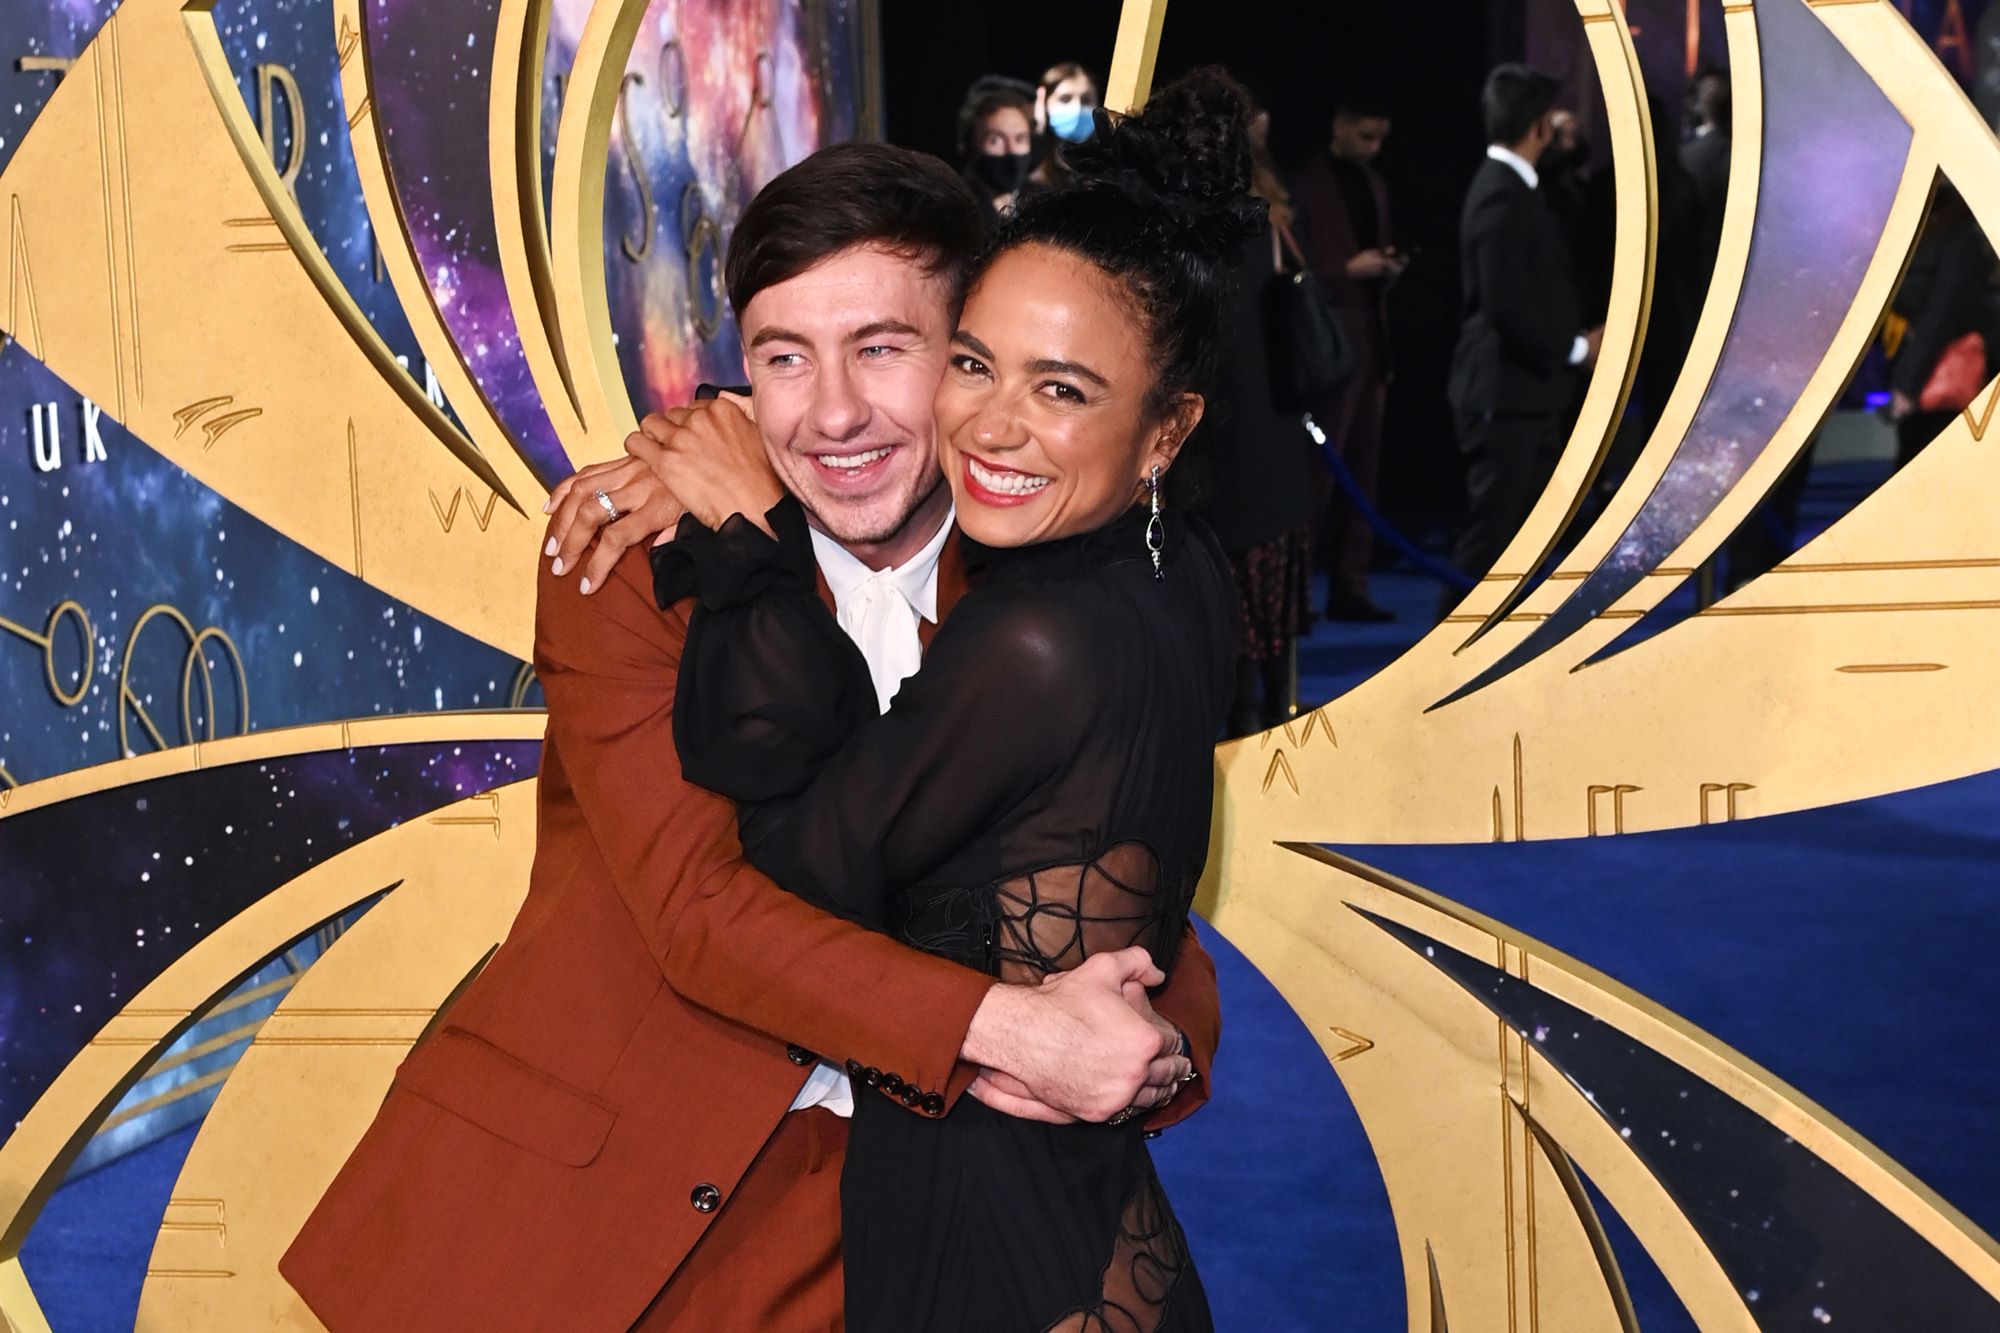 Marvel's 'Eternals' stars Barry Keoghan and Lauren Ridloff embrace one another on the red carpet. Keoghan wears a brown red suit and pants and a white shirt. Ridloff wears a black long-sleeved dress. Keoghan and Ridloff play Druig and Makkari in the film, a couple that many fans prefer over Sersi and Ikaris.